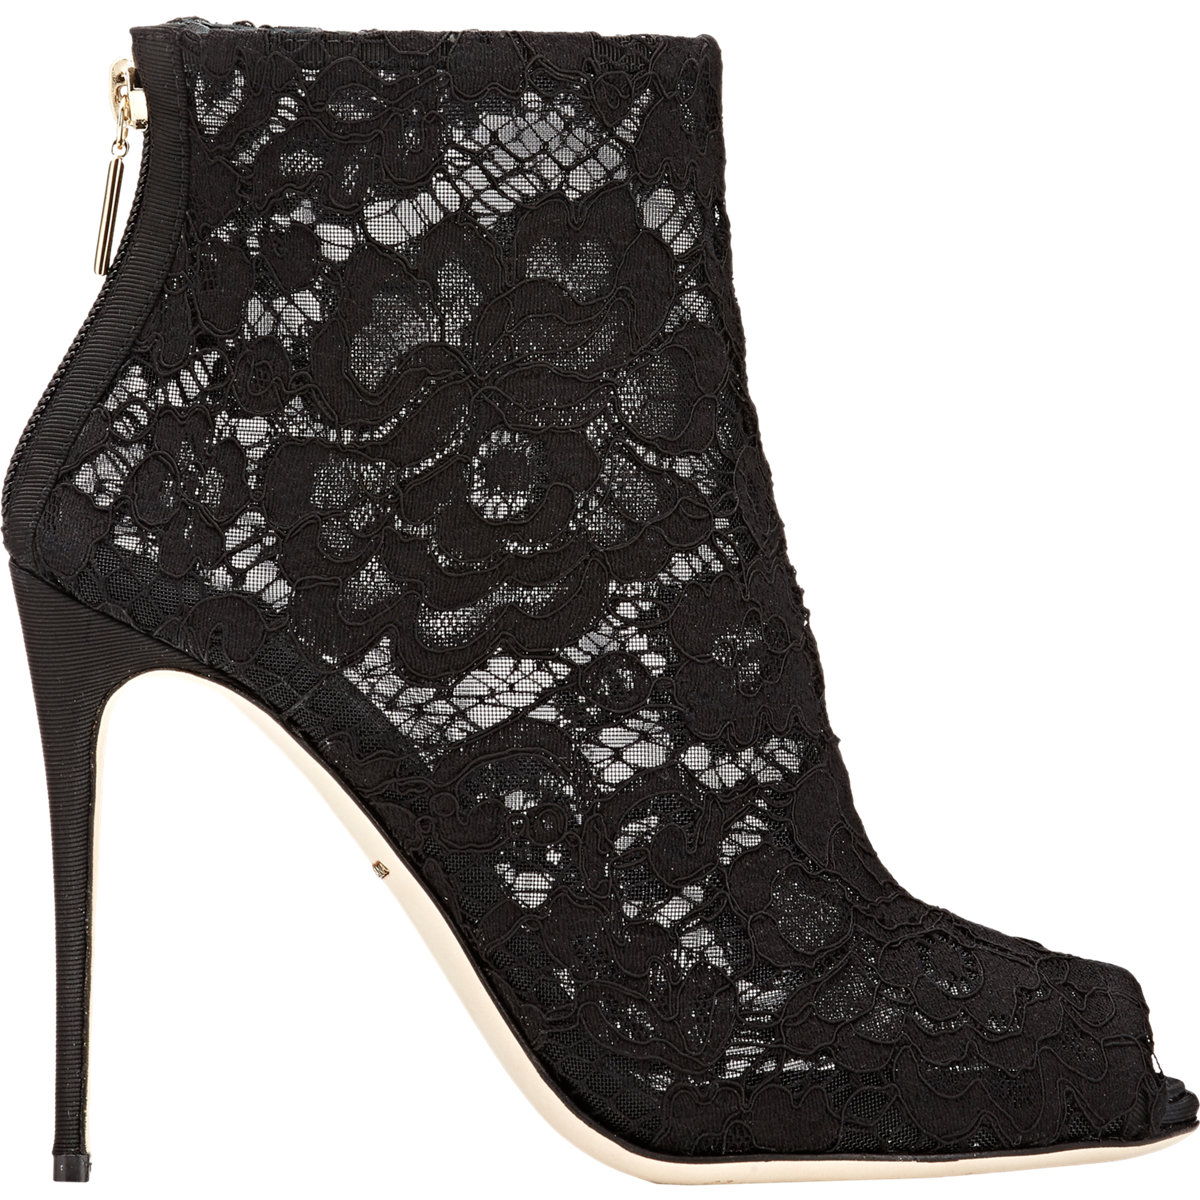 Dolce & gabbana Lace Ankle Boots in Black | Lyst